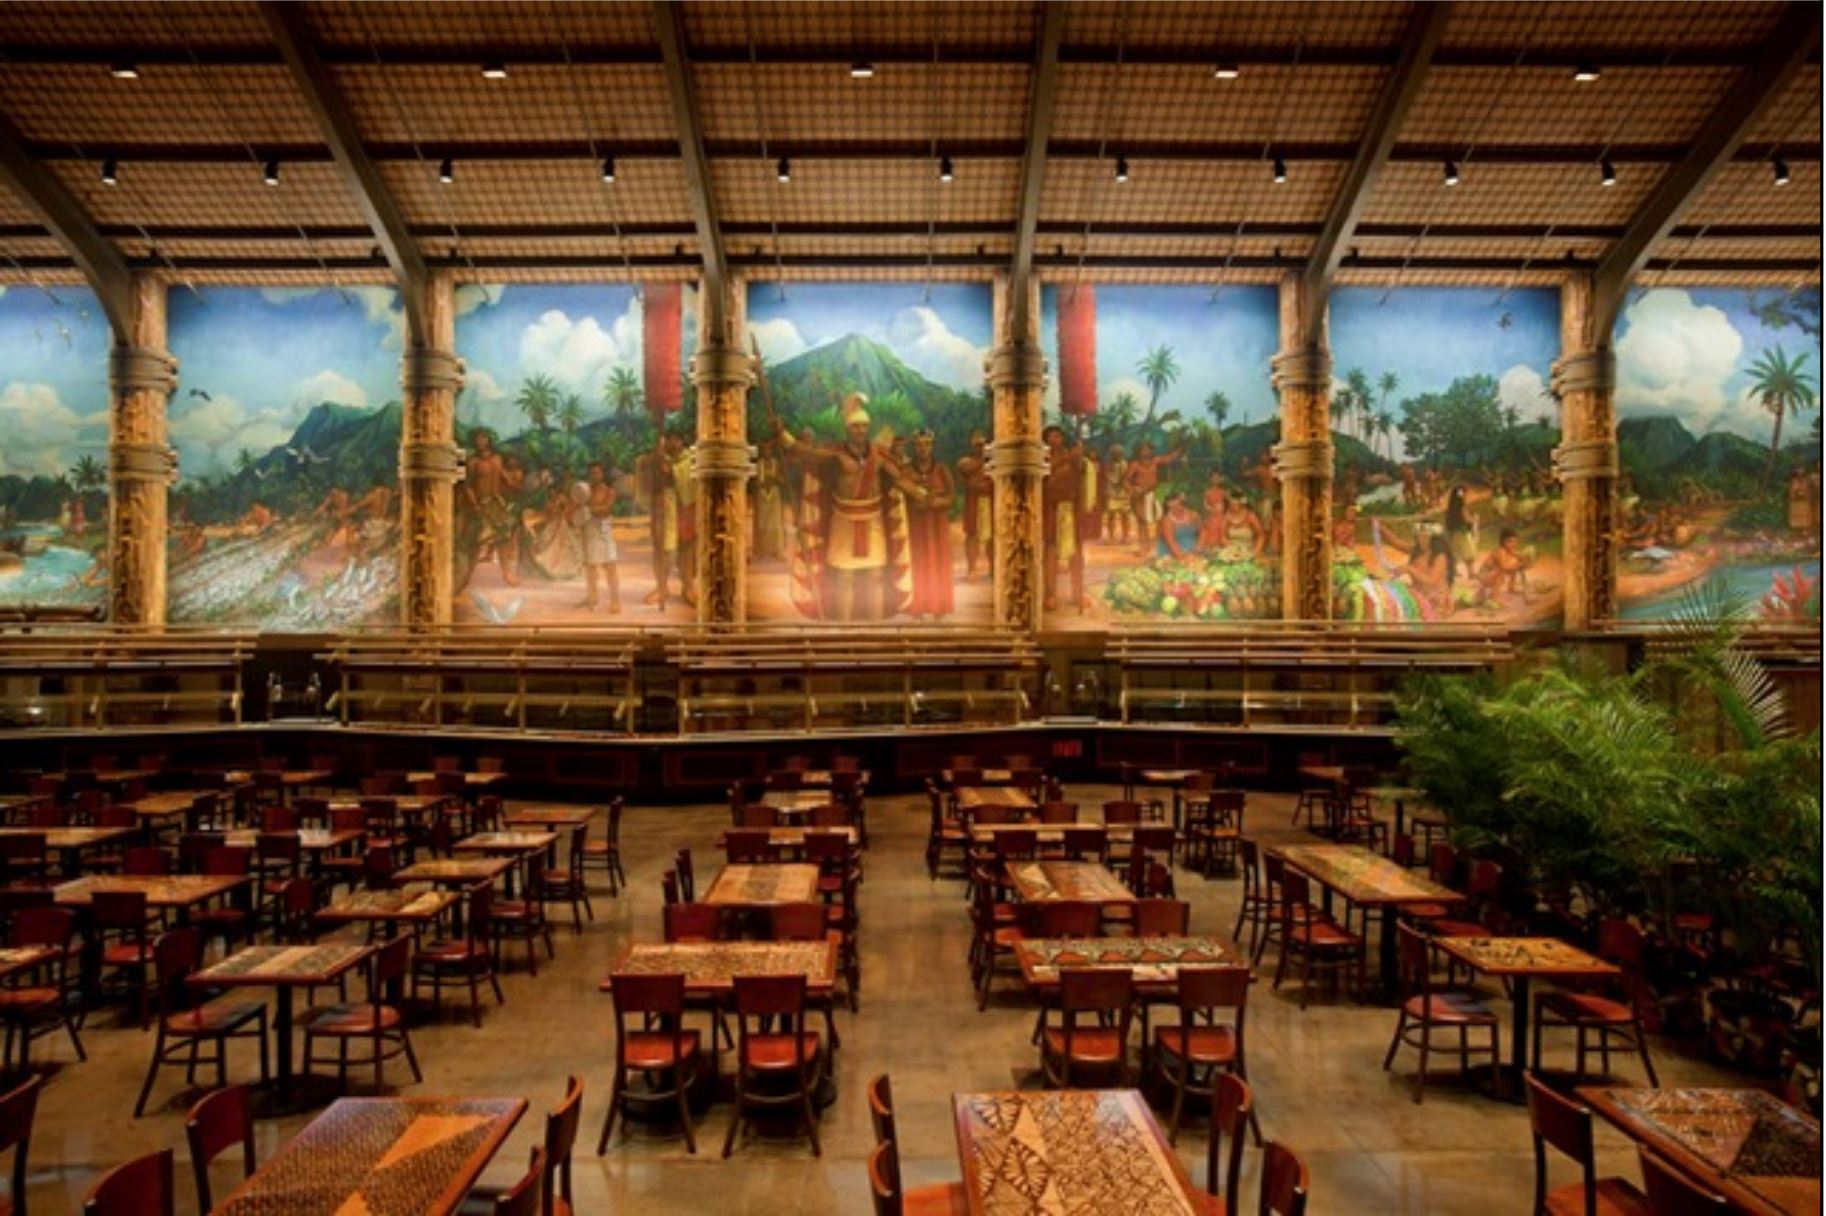 Image of the 360 degree mural in the Gateway Dining facility at the Polynesian Cultural Center that depicts the welcoming of guests to a great Hawaiian luau with the center figure of King Kamehameha